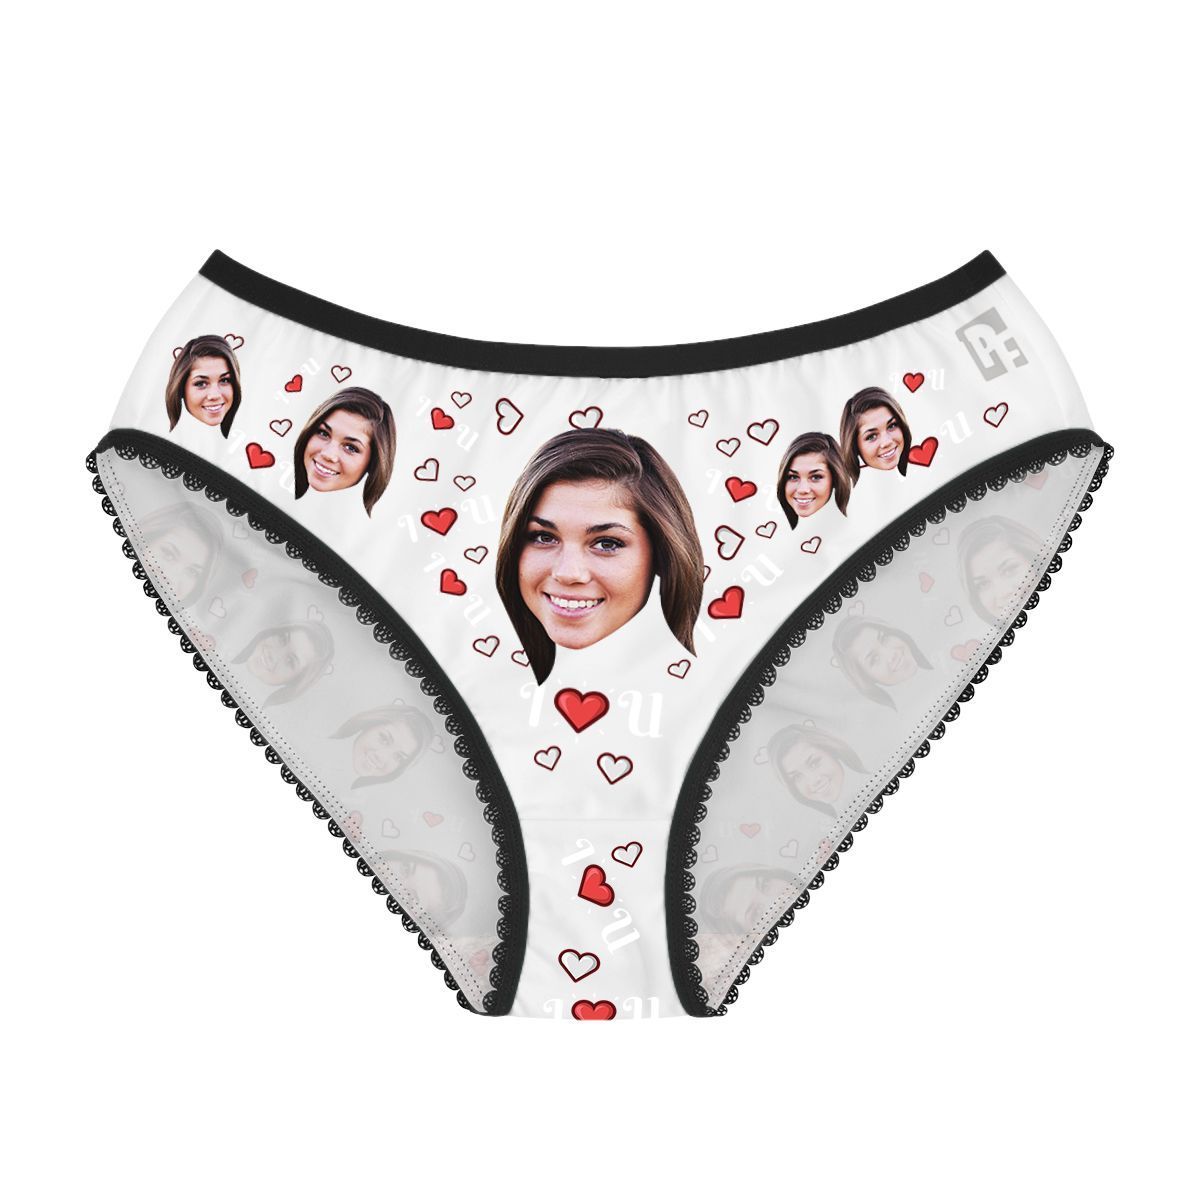 White I <3 You women's underwear briefs personalized with photo printed on them